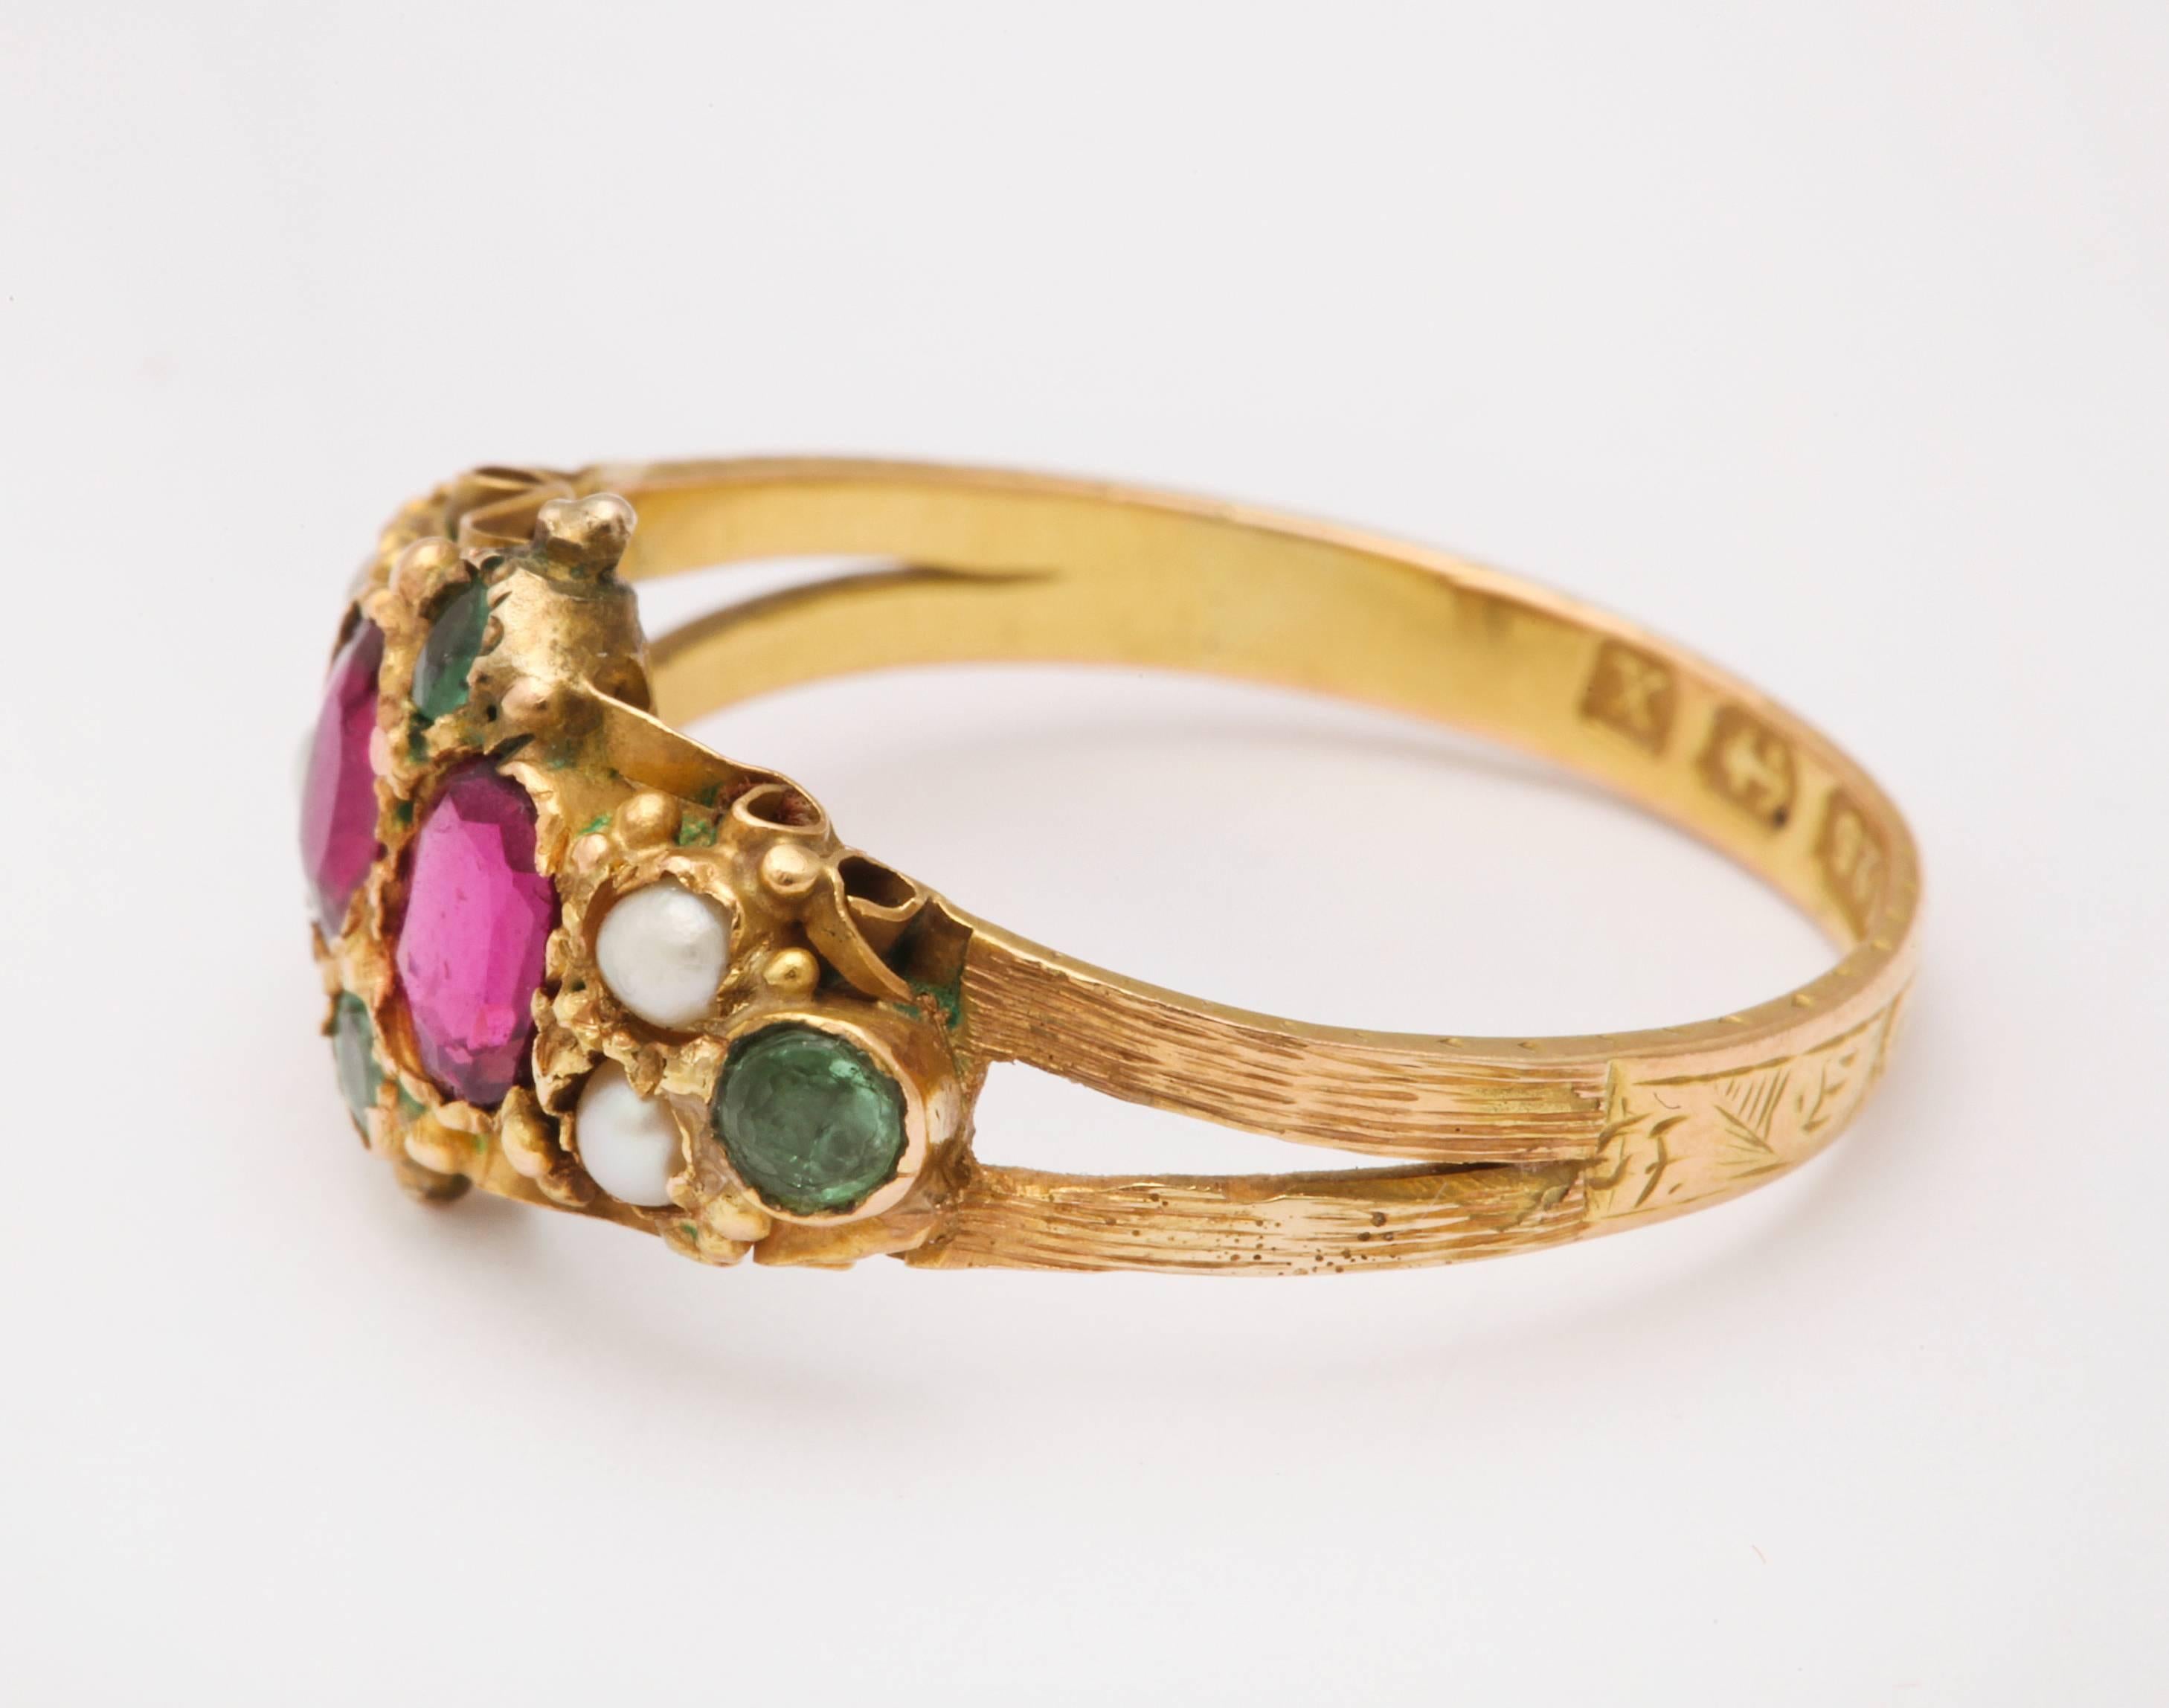 Victorian Endearing Ring of Rubies, Emeralds and Pearls 